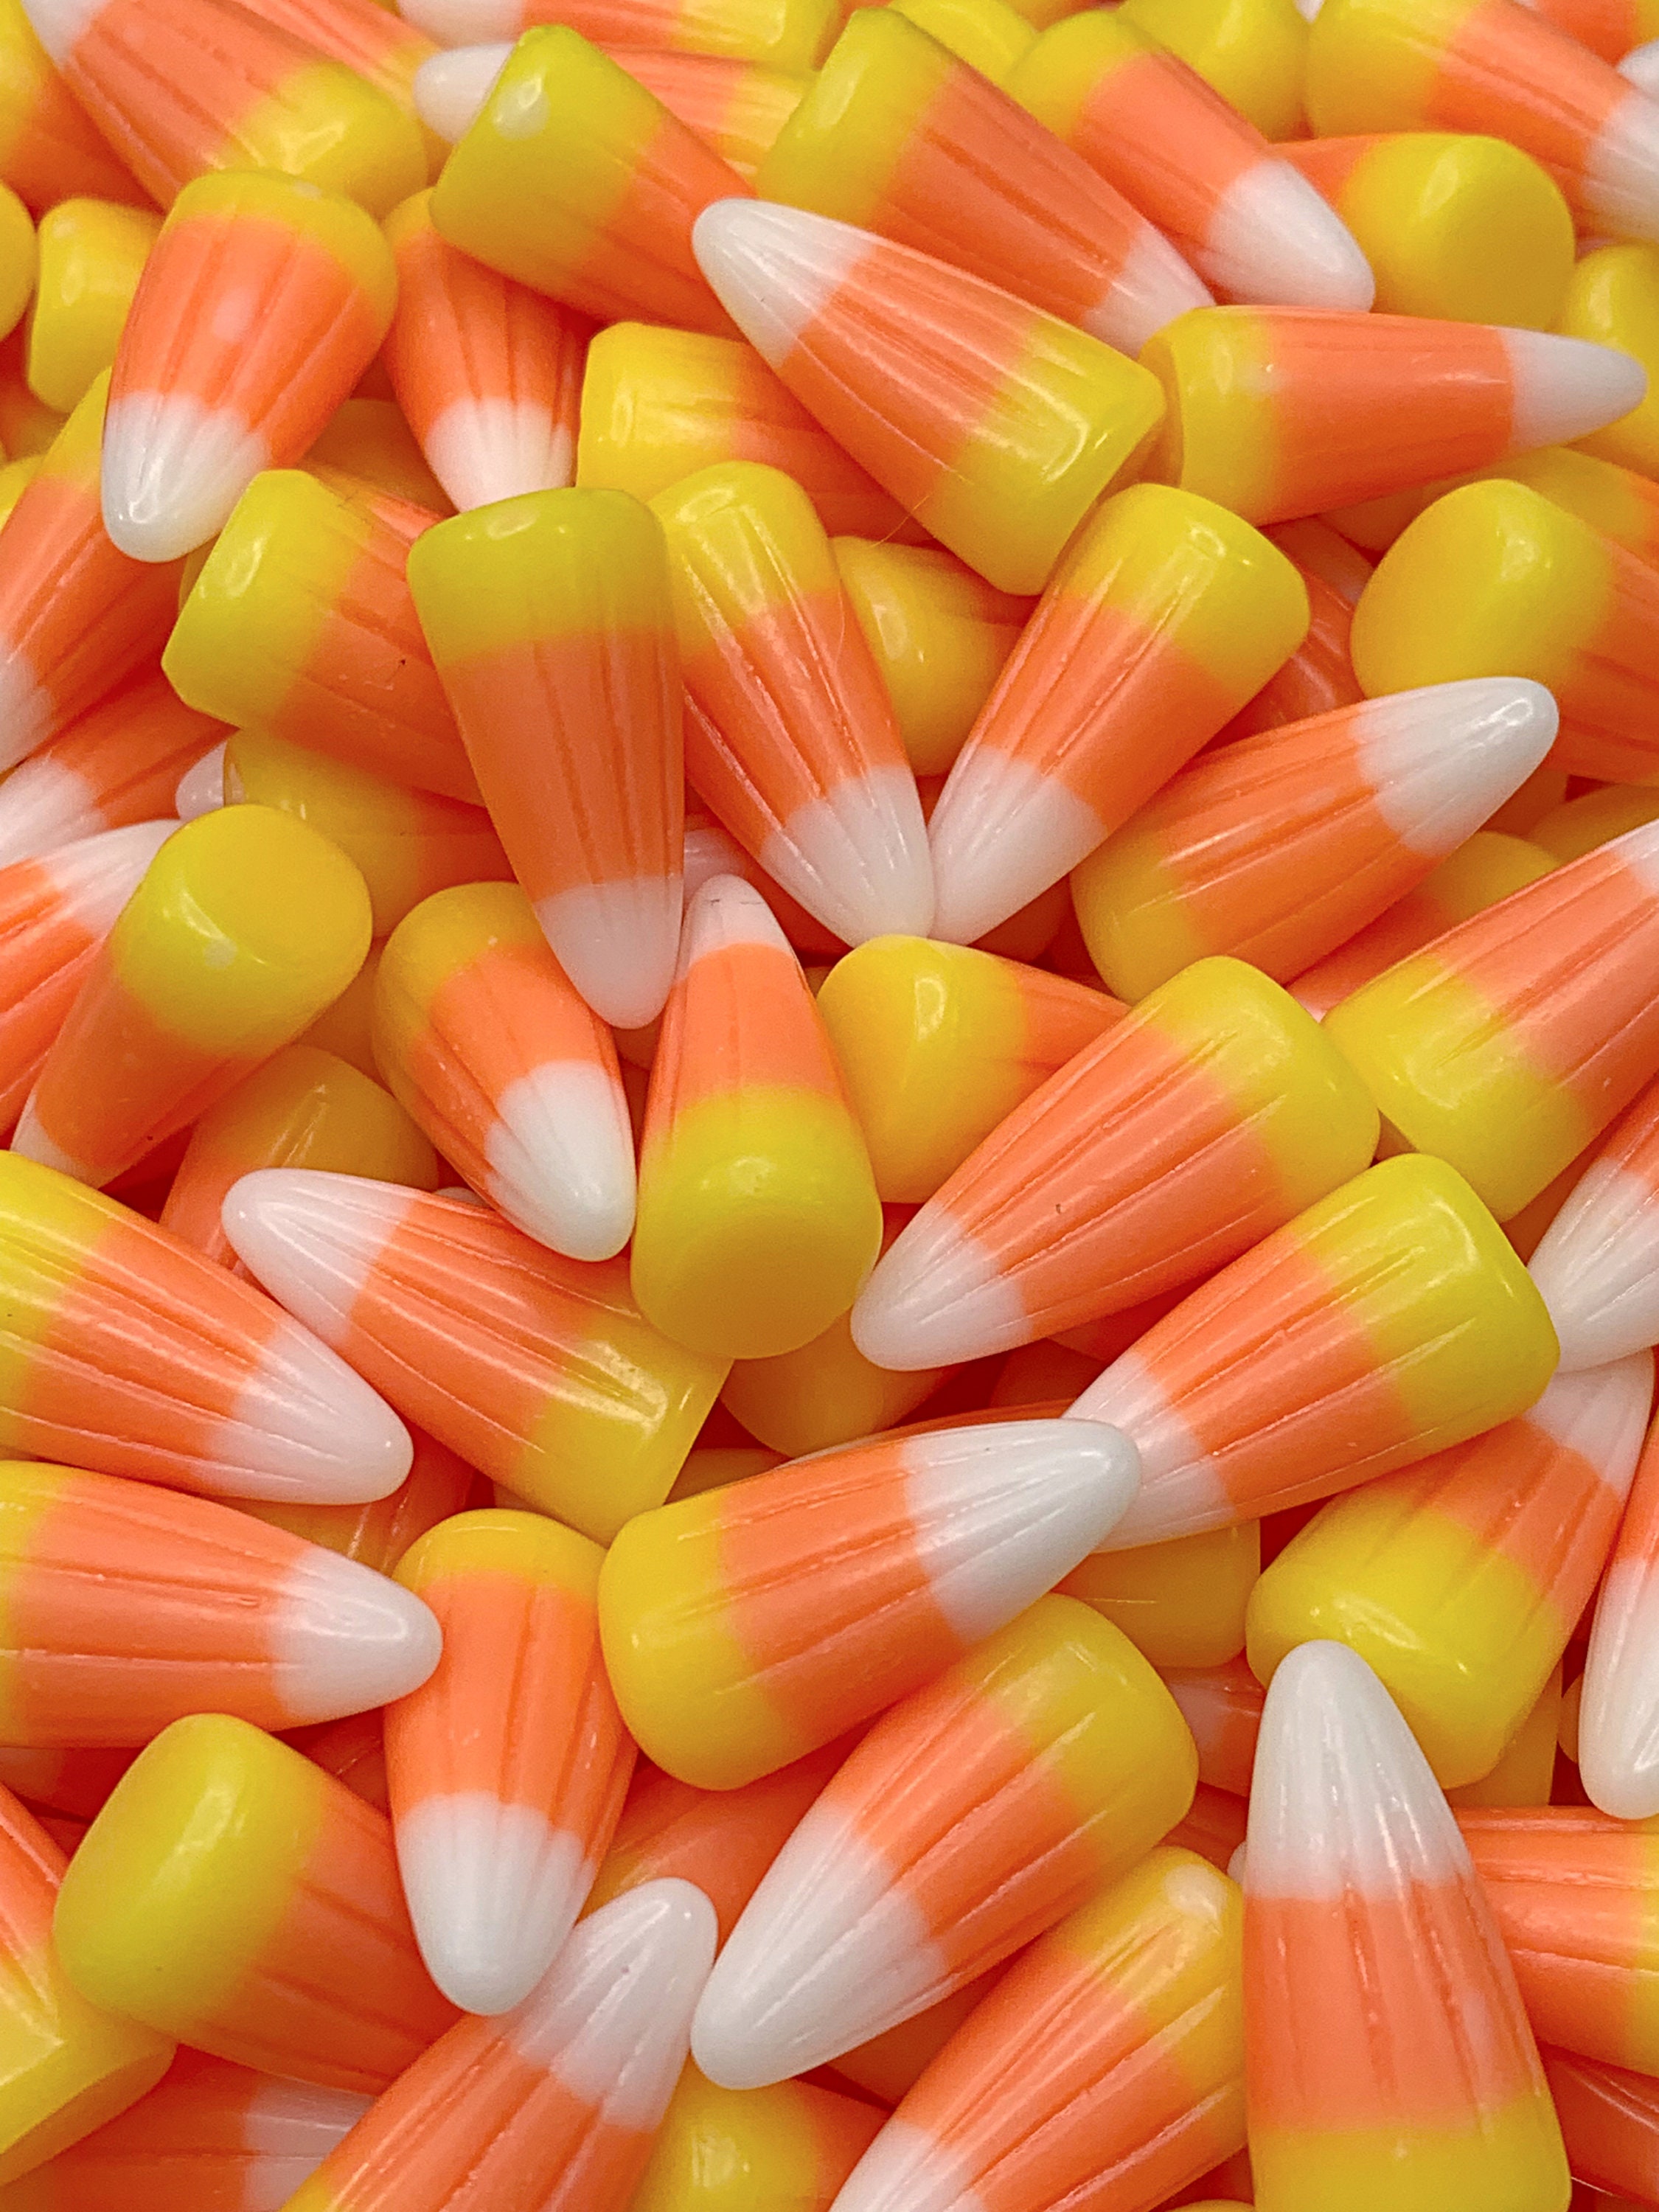 Fake Christmas Candy Corn, Realistic Christmas Candy Corn, Fake Christmas  Candy, Fake Candy, Faux Candy Corn, Tiered Tray Candy Decor, Candy 